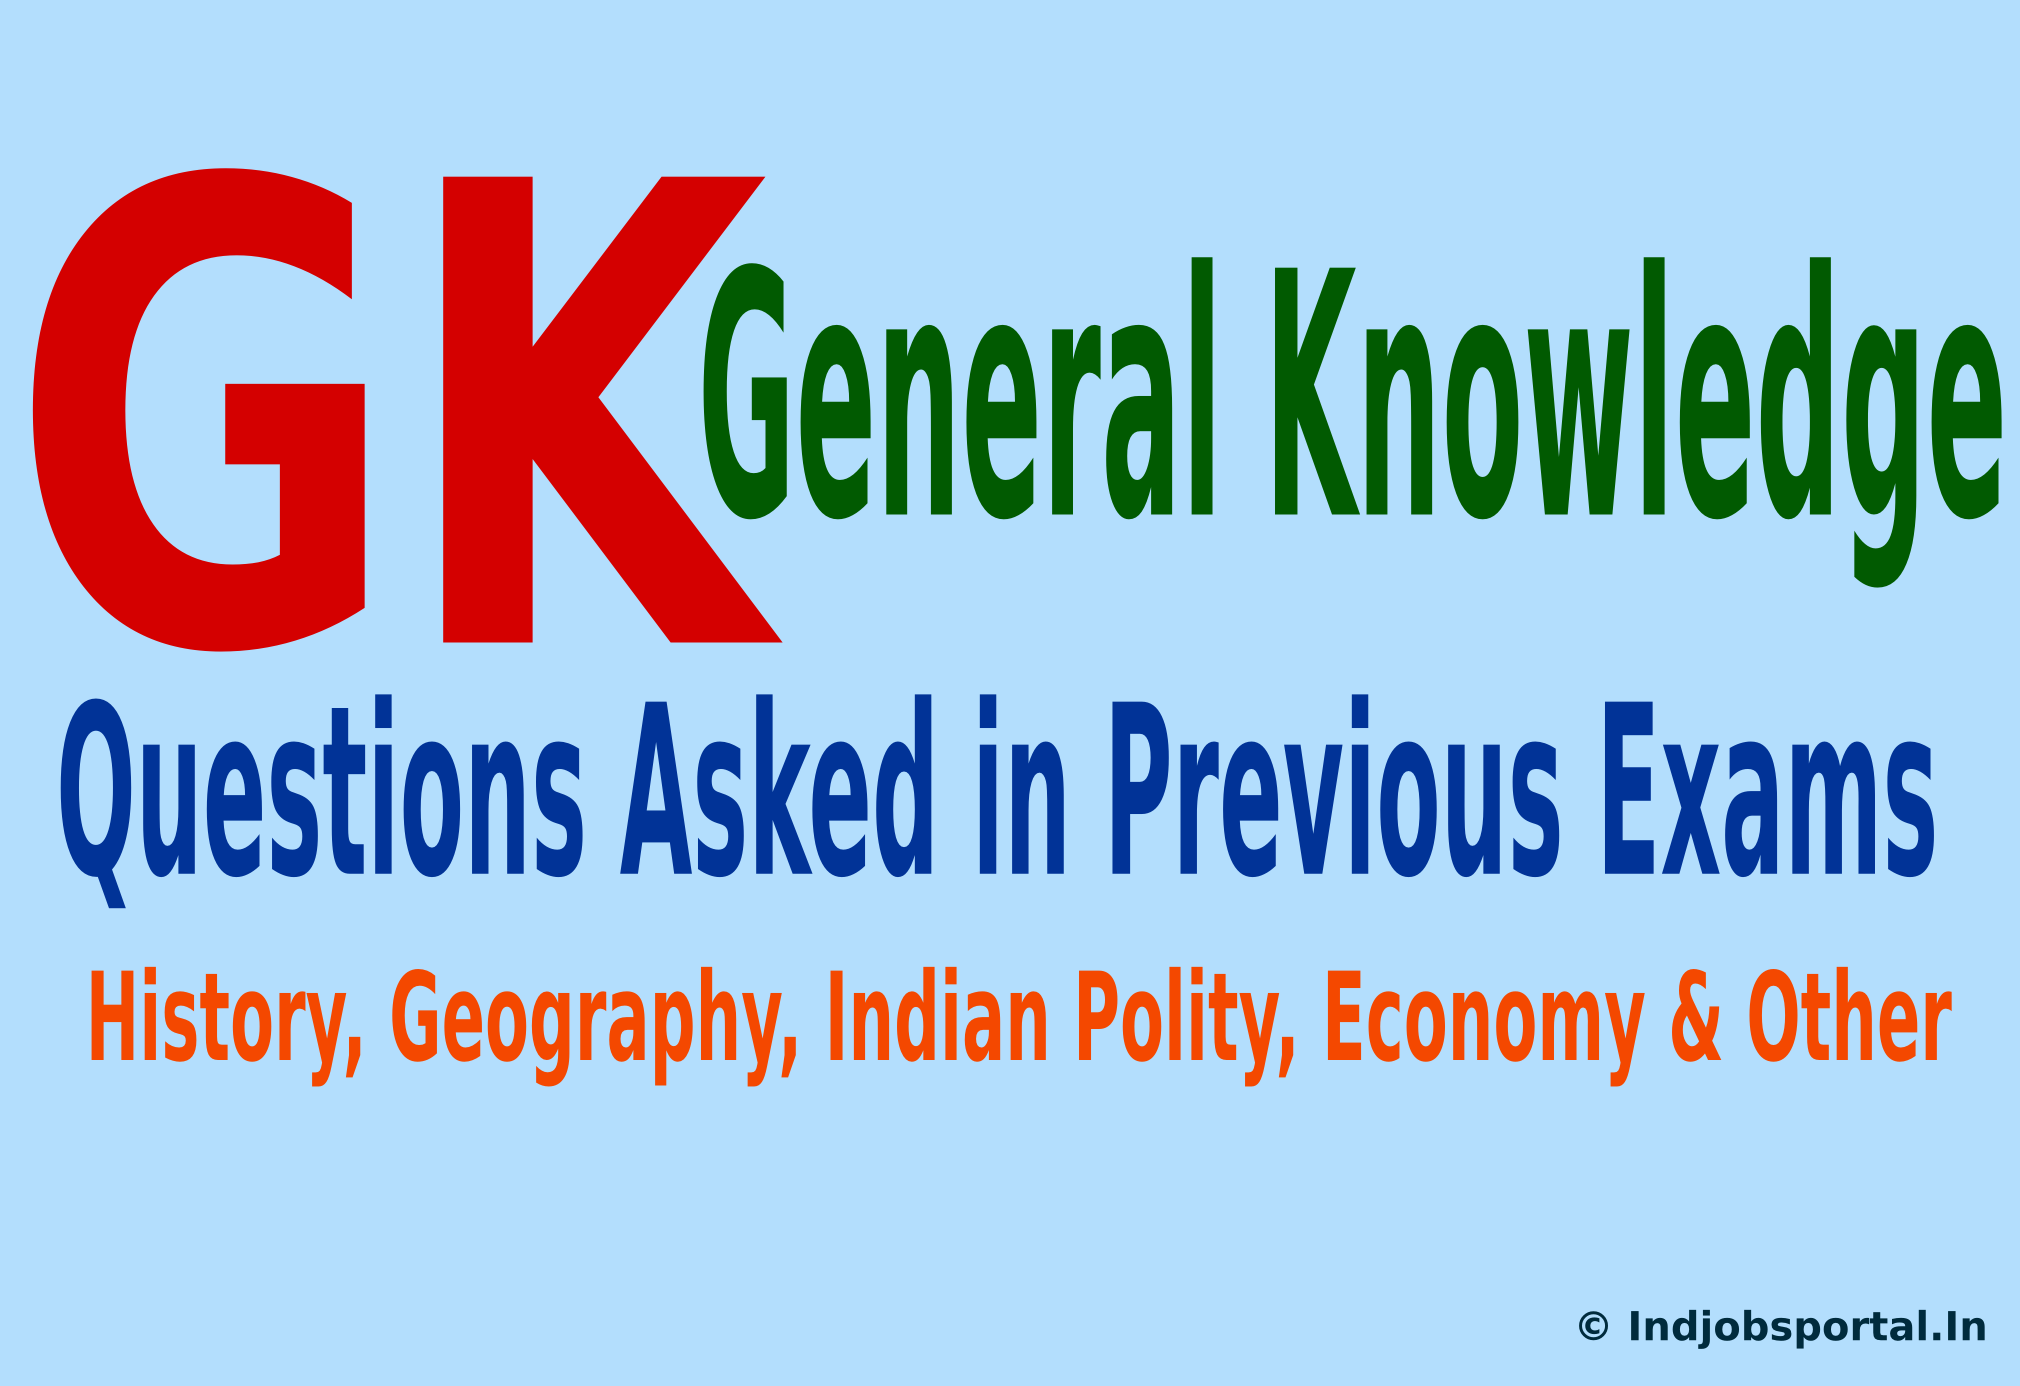 GK Questions Asked in Previous Exams On History, Geography, Indian Polity, Economy & Other